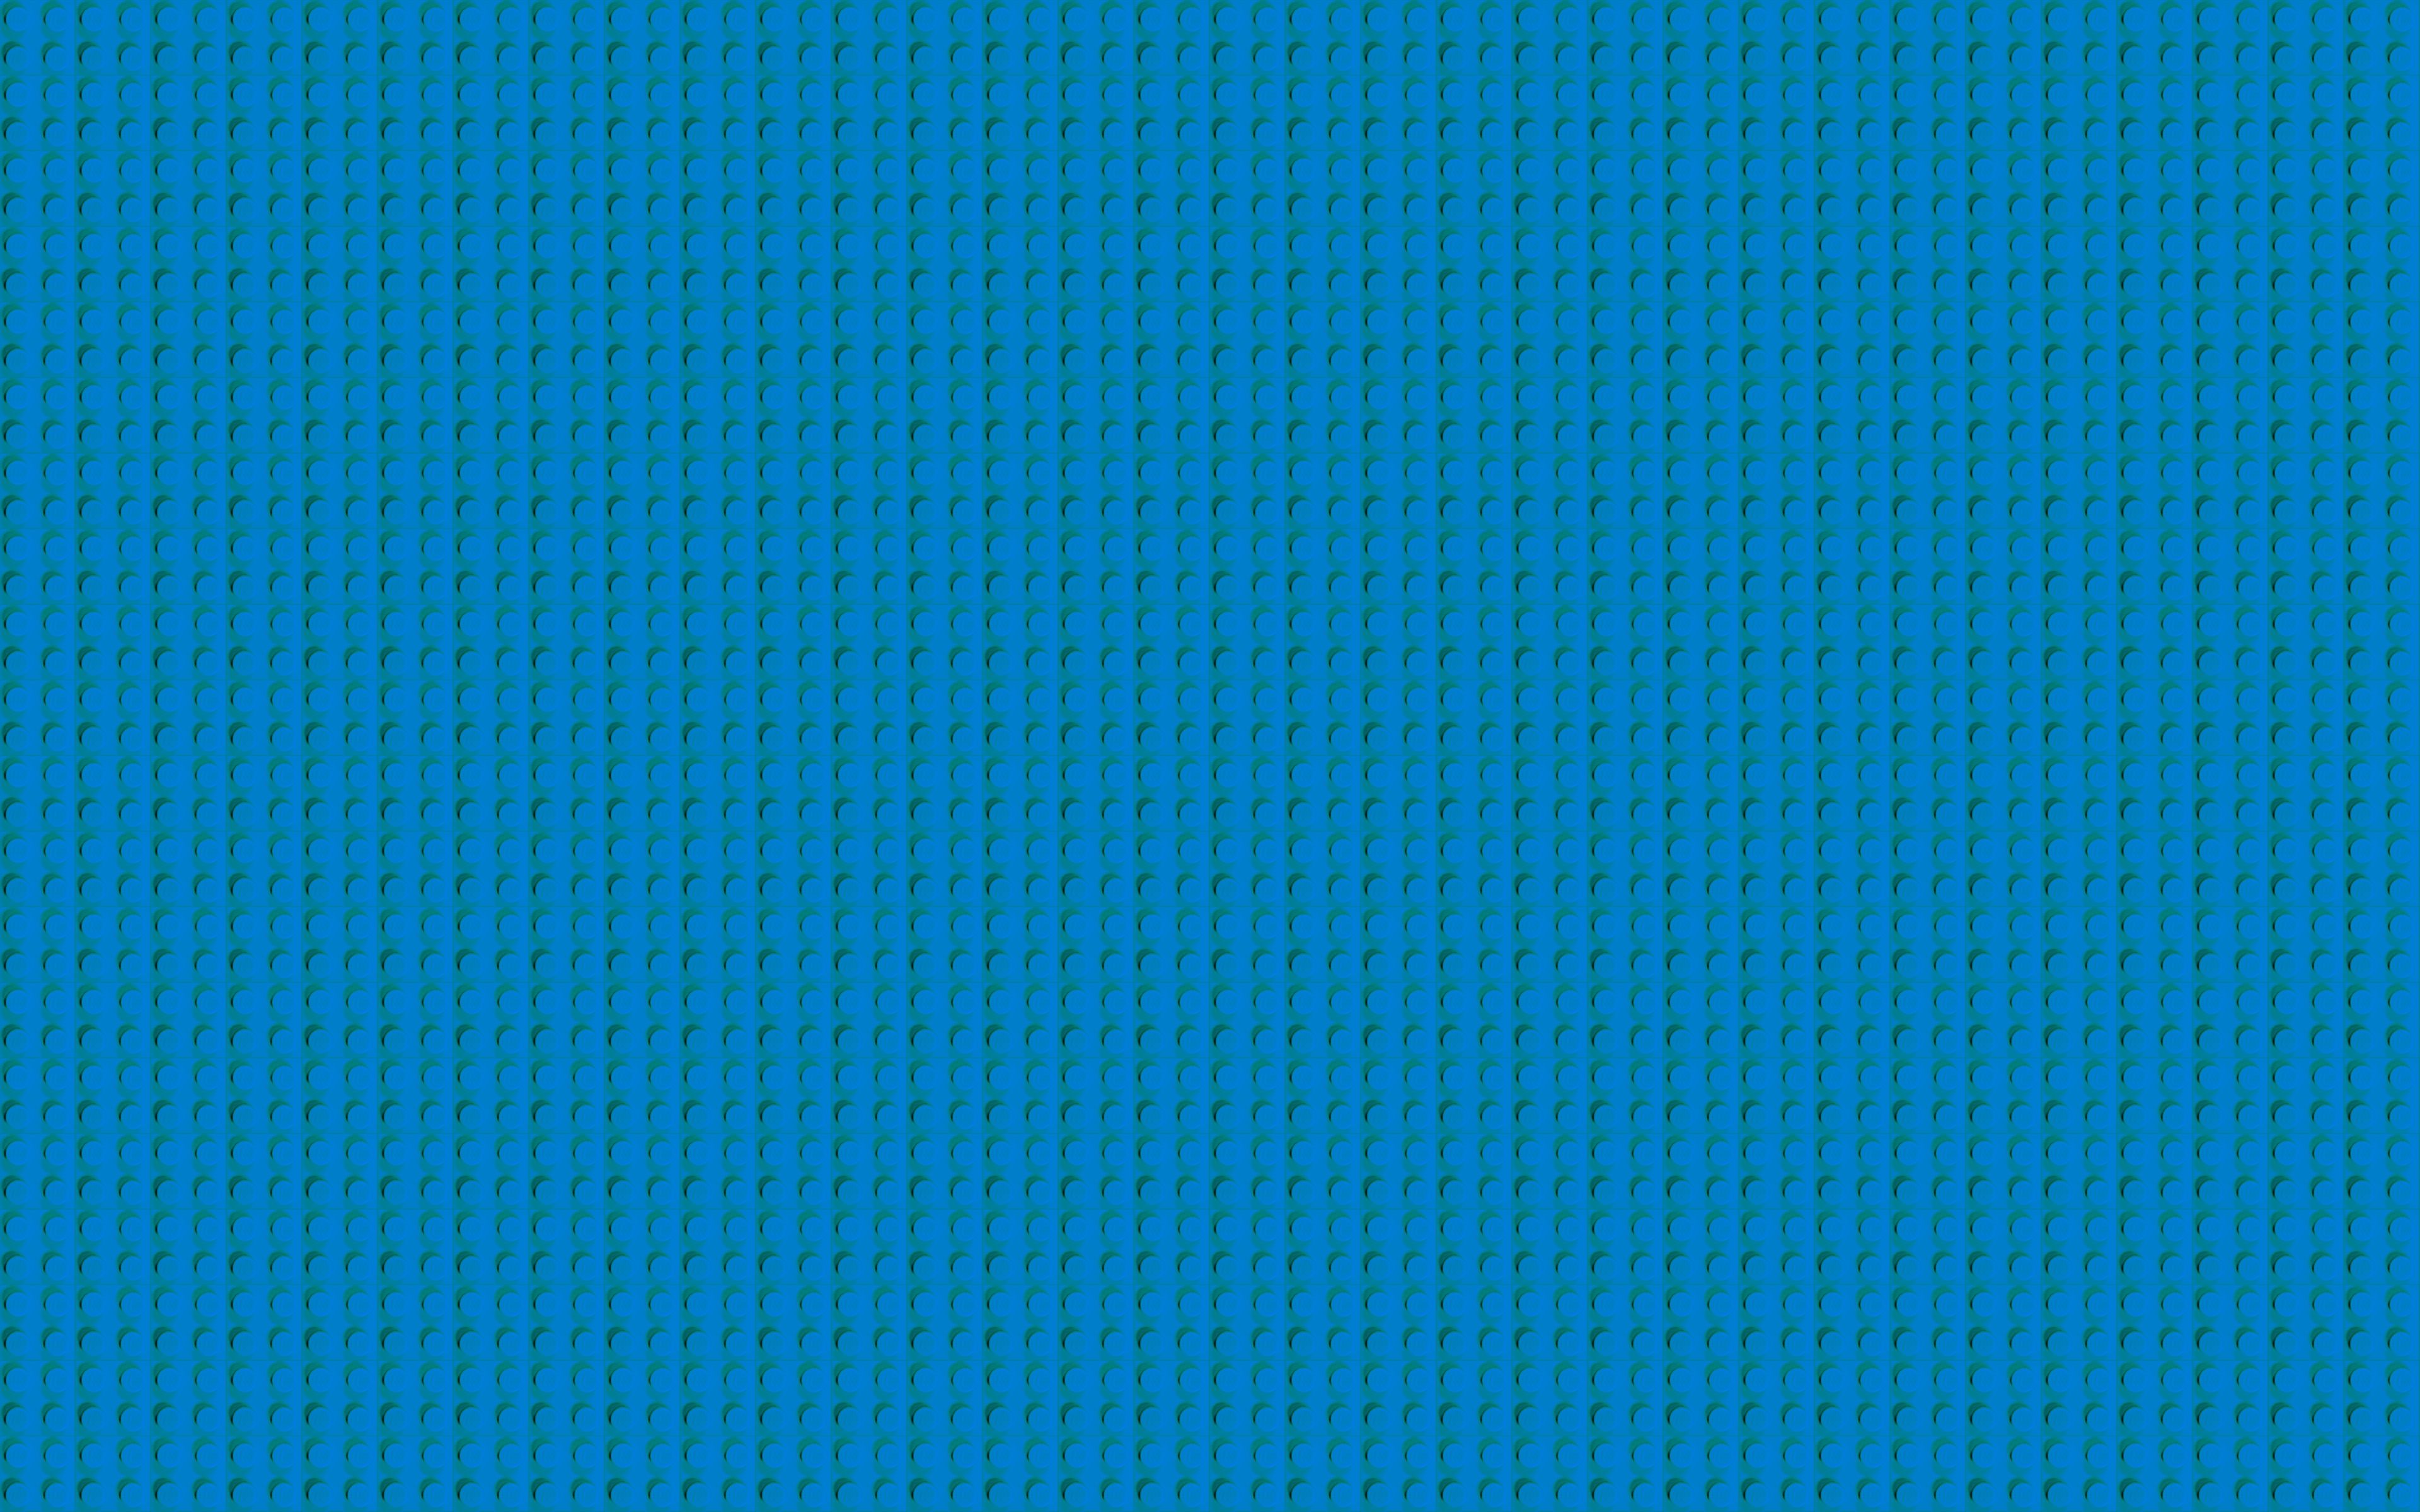 Download wallpaper blue lego texture, 4k, macro, blue dots background, lego, blue background, lego textures, lego patterns for desktop with resolution 3840x2400. High Quality HD picture wallpaper